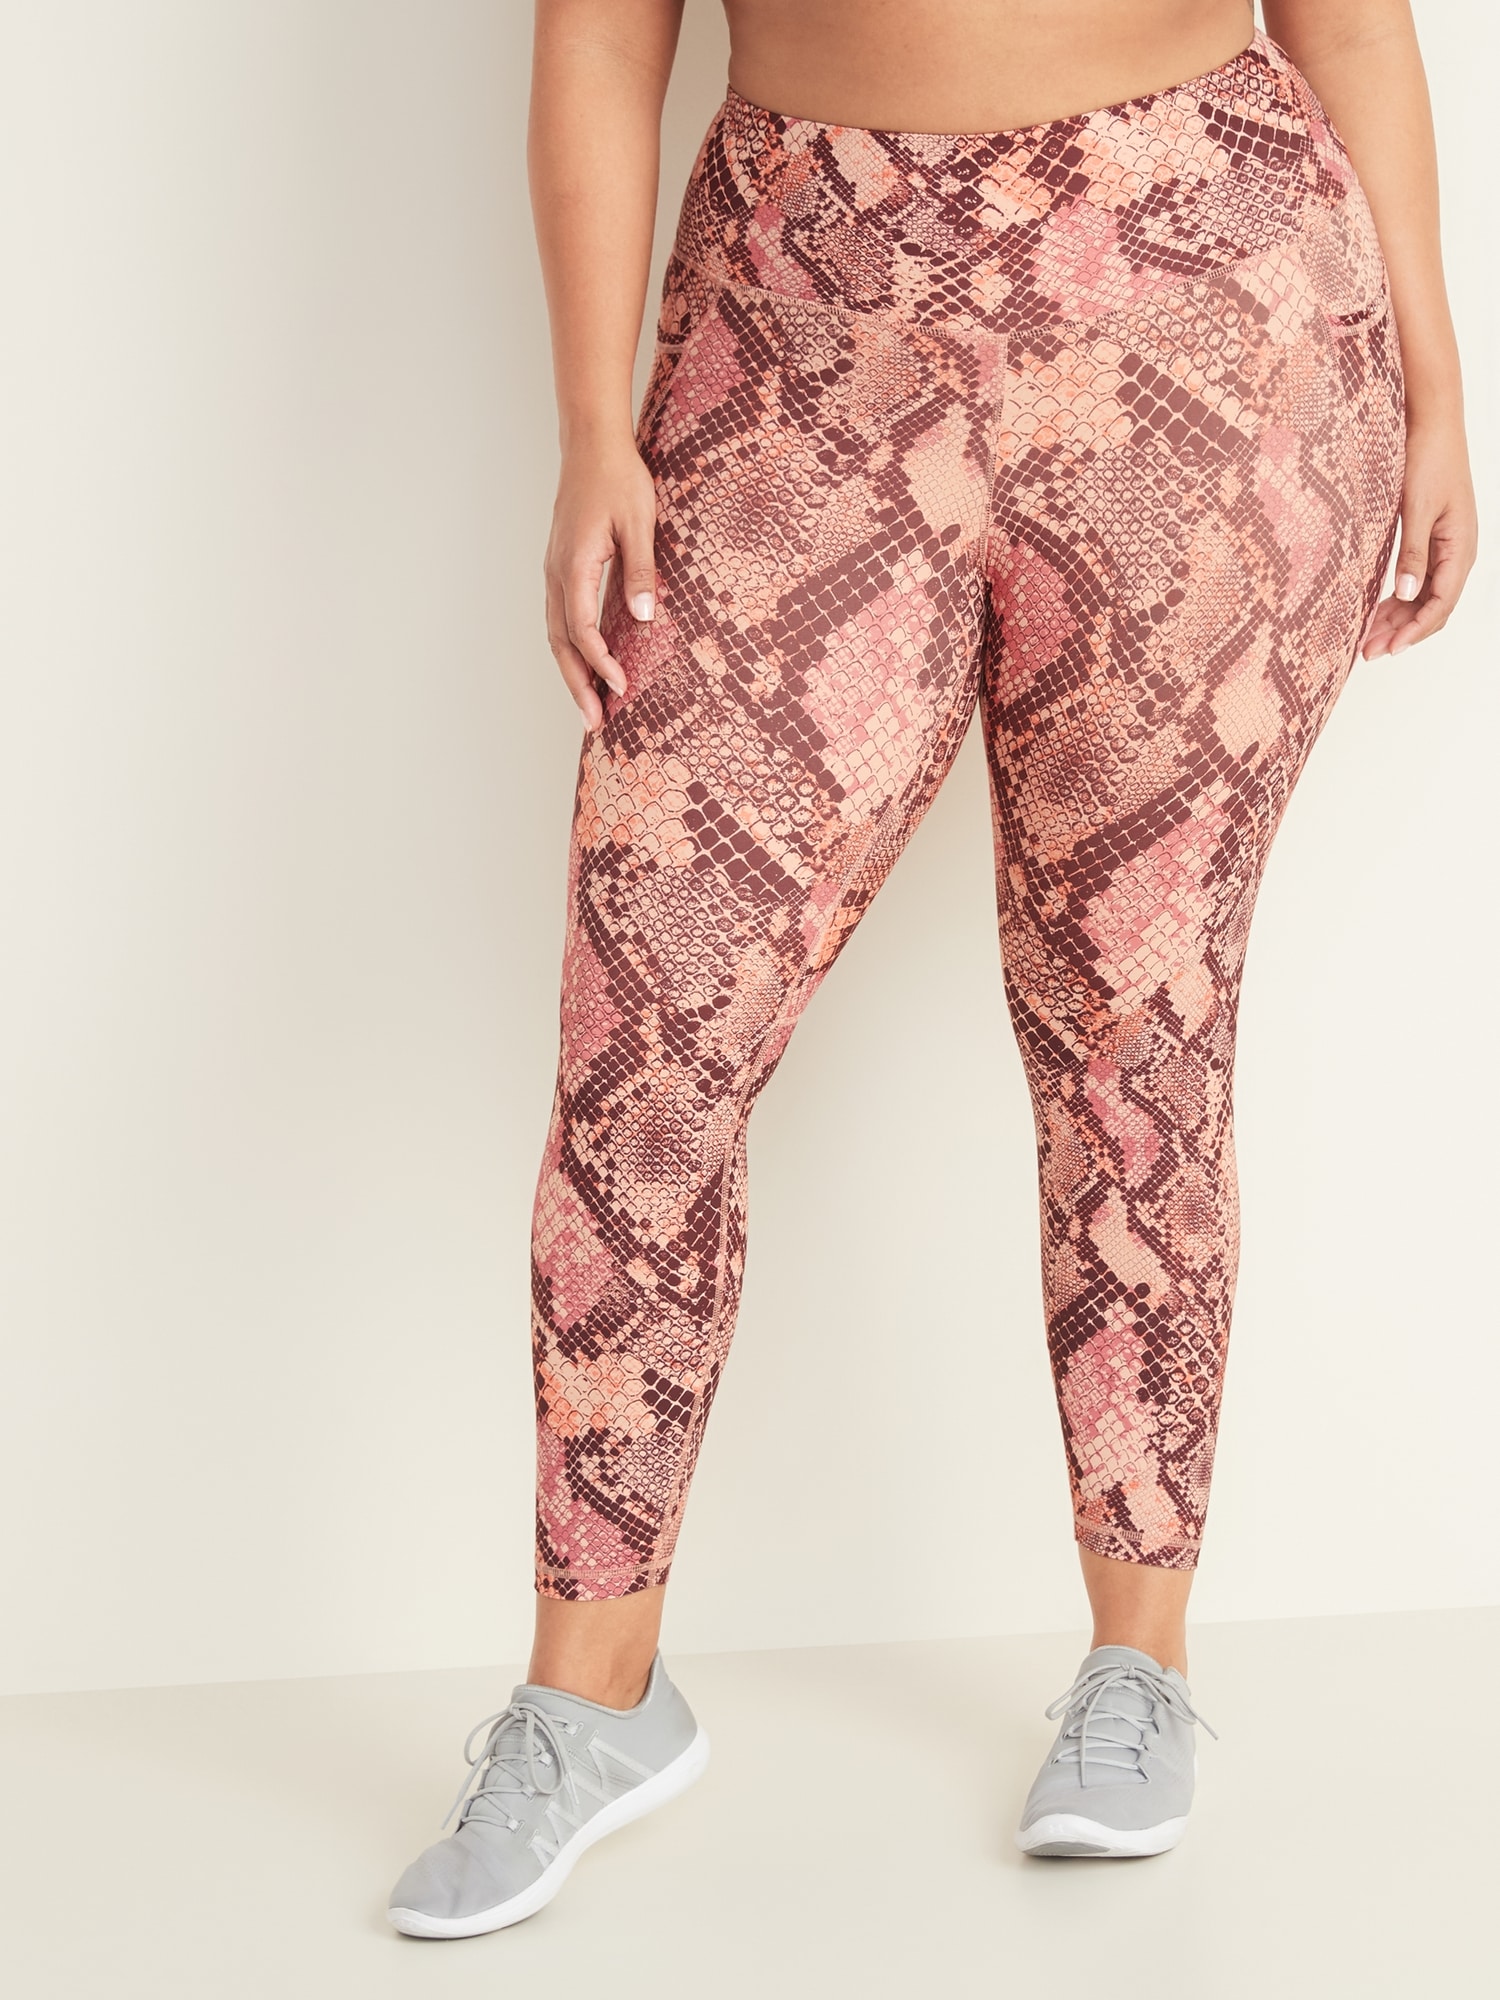 Old Navy Leggings Active High-Waisted Elevated Pink Tropical